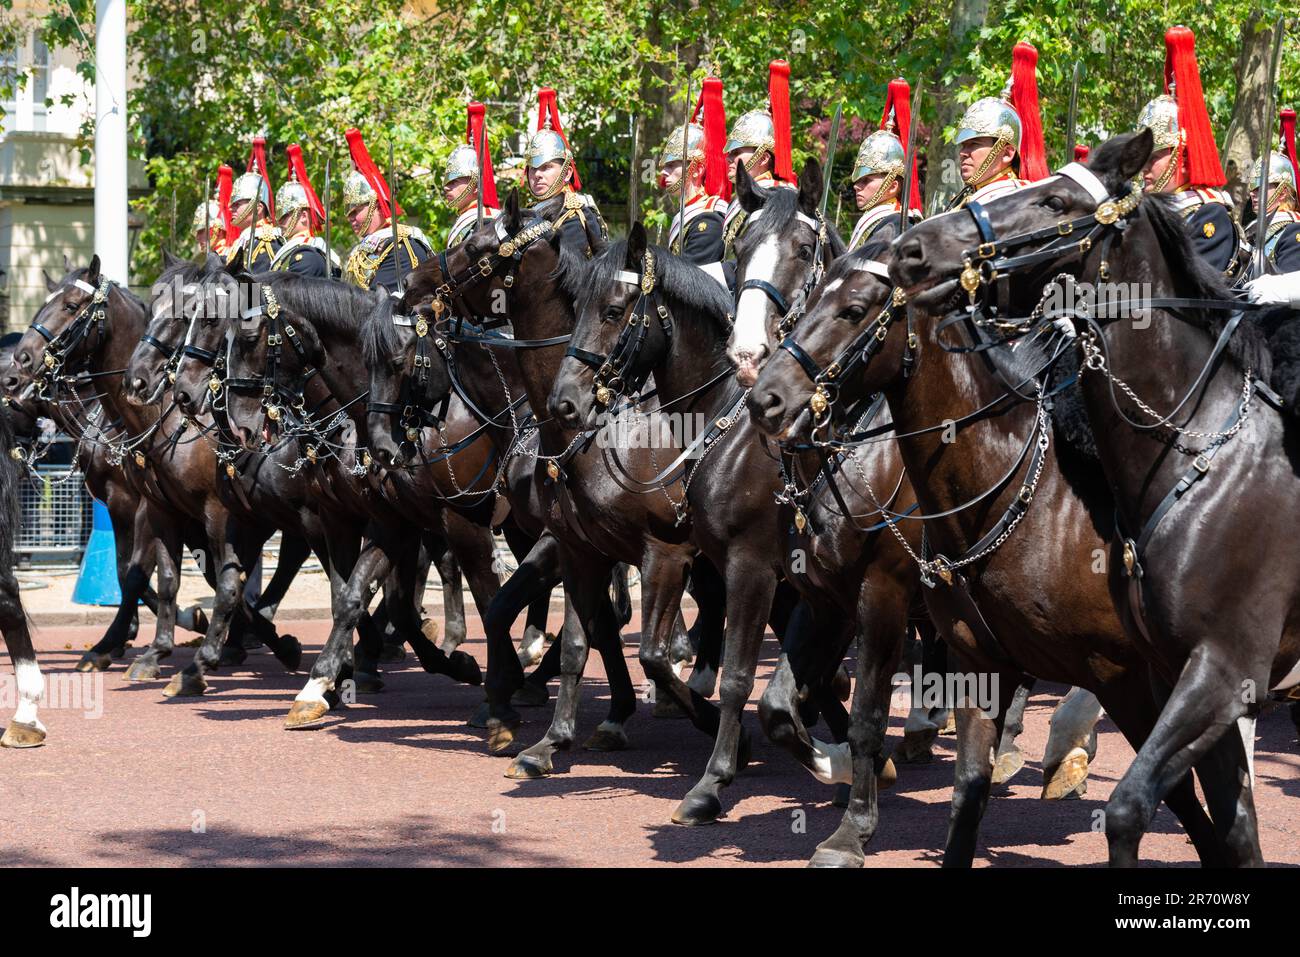 Colonel's review of Trooping the Colour is a final evaluation of the military parade before the full event takes place next week. Blues & Royals Stock Photo